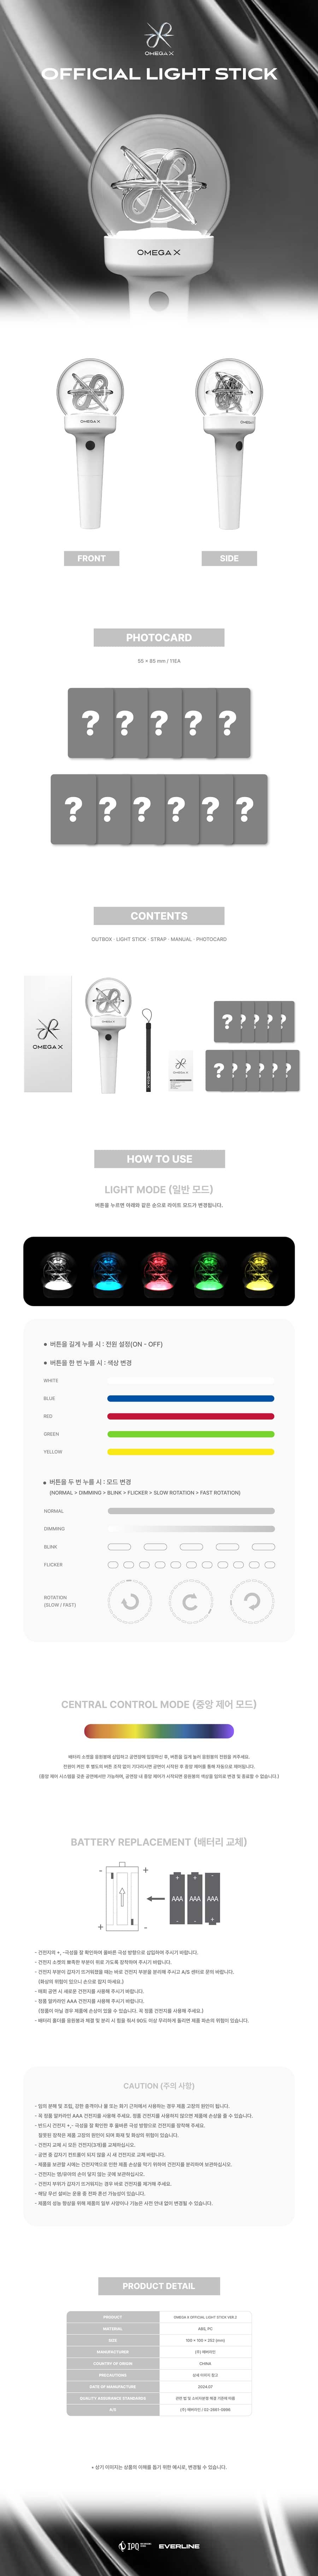 omega-x-official-light-stick-ver-2-wholesales